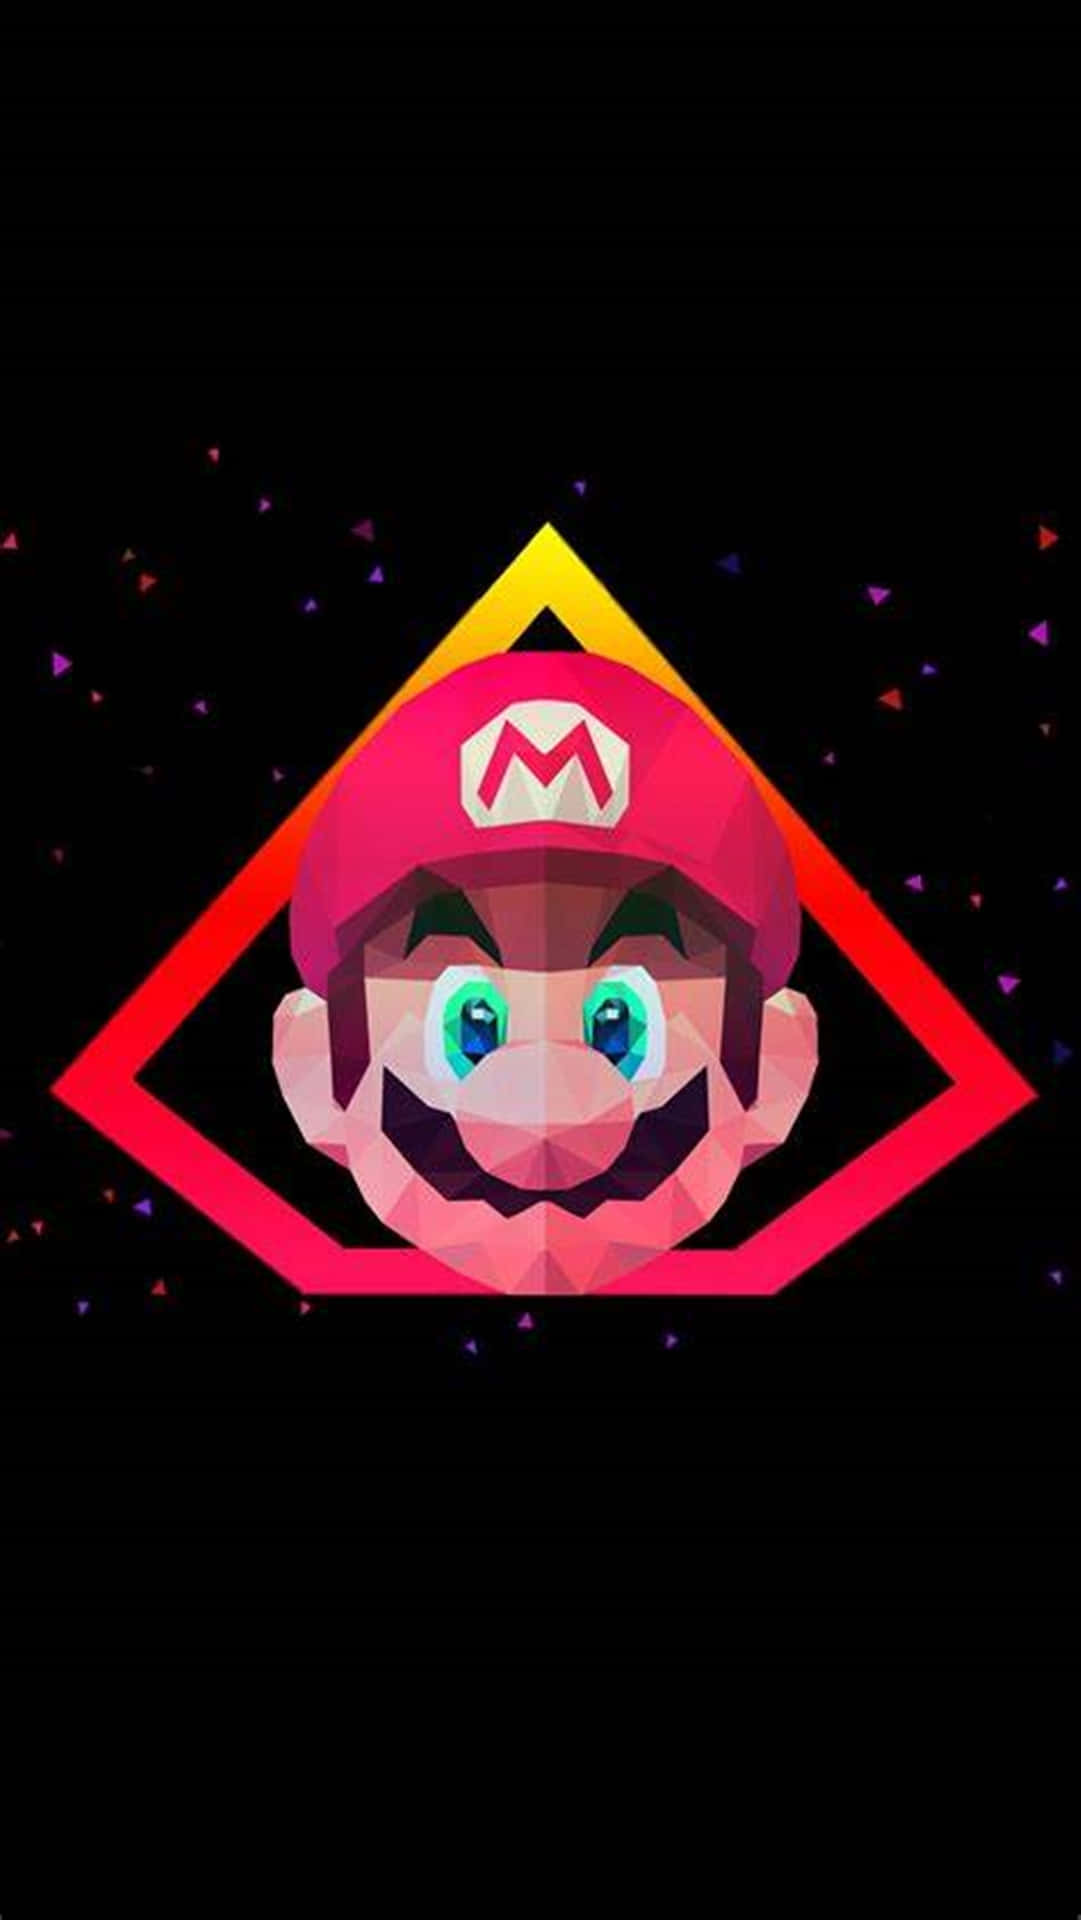 Enjoy Super Mario Bros. on the Go With iPhone Wallpaper